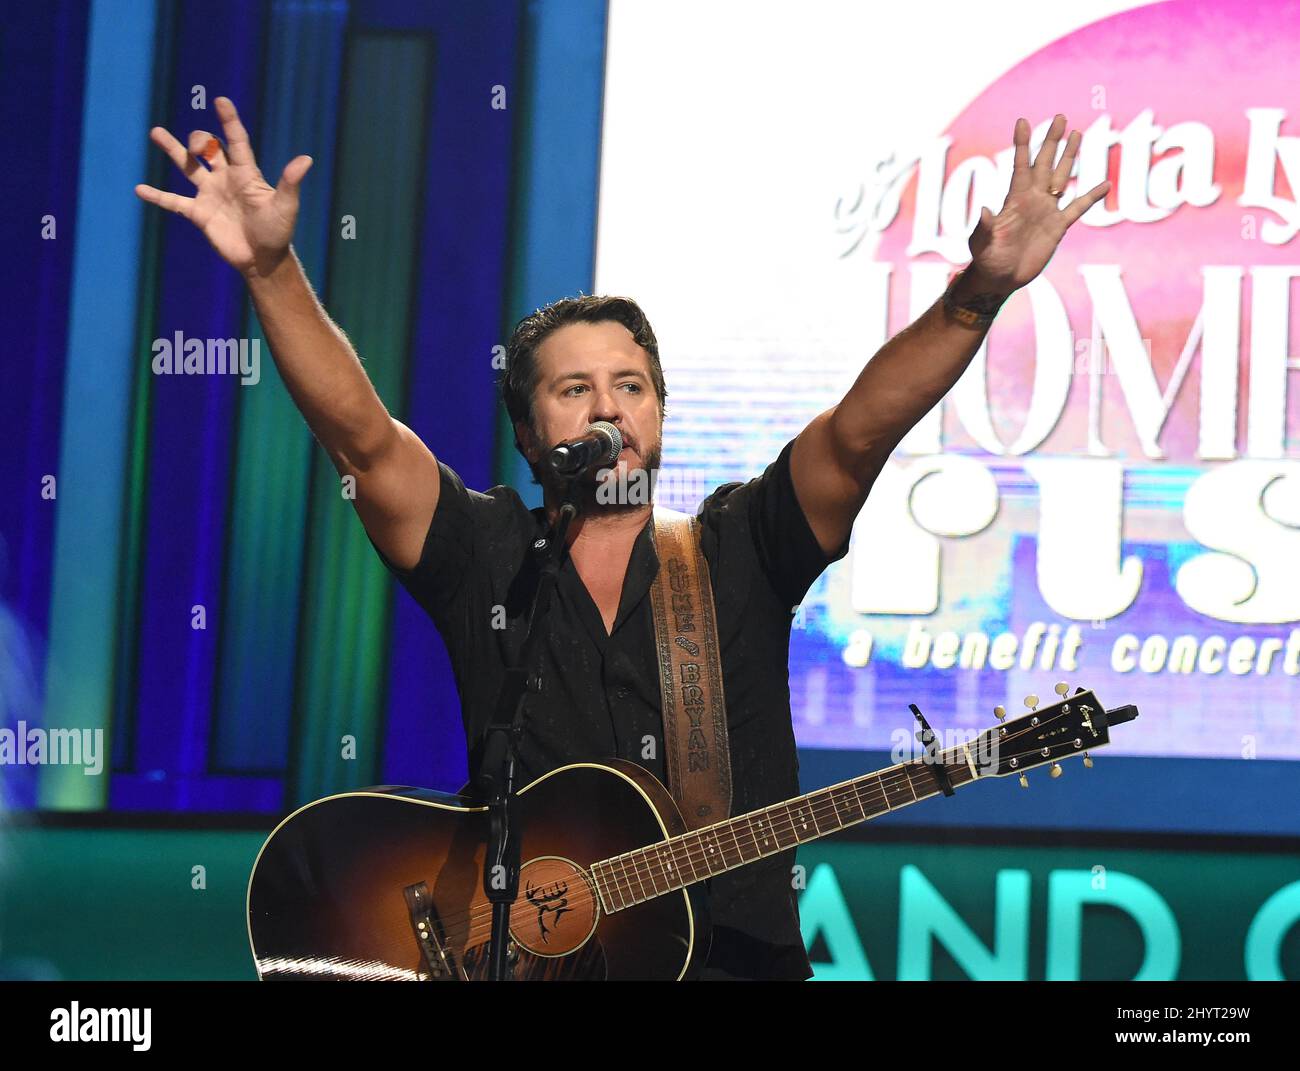 Luke Bryan performing onstage at Loretta Lynn's Friends: Hometown Rising benefit concert with proceeds benefiting the United Way of Humphreys County on September 13, 2021 in Nashville, TN. Stock Photo